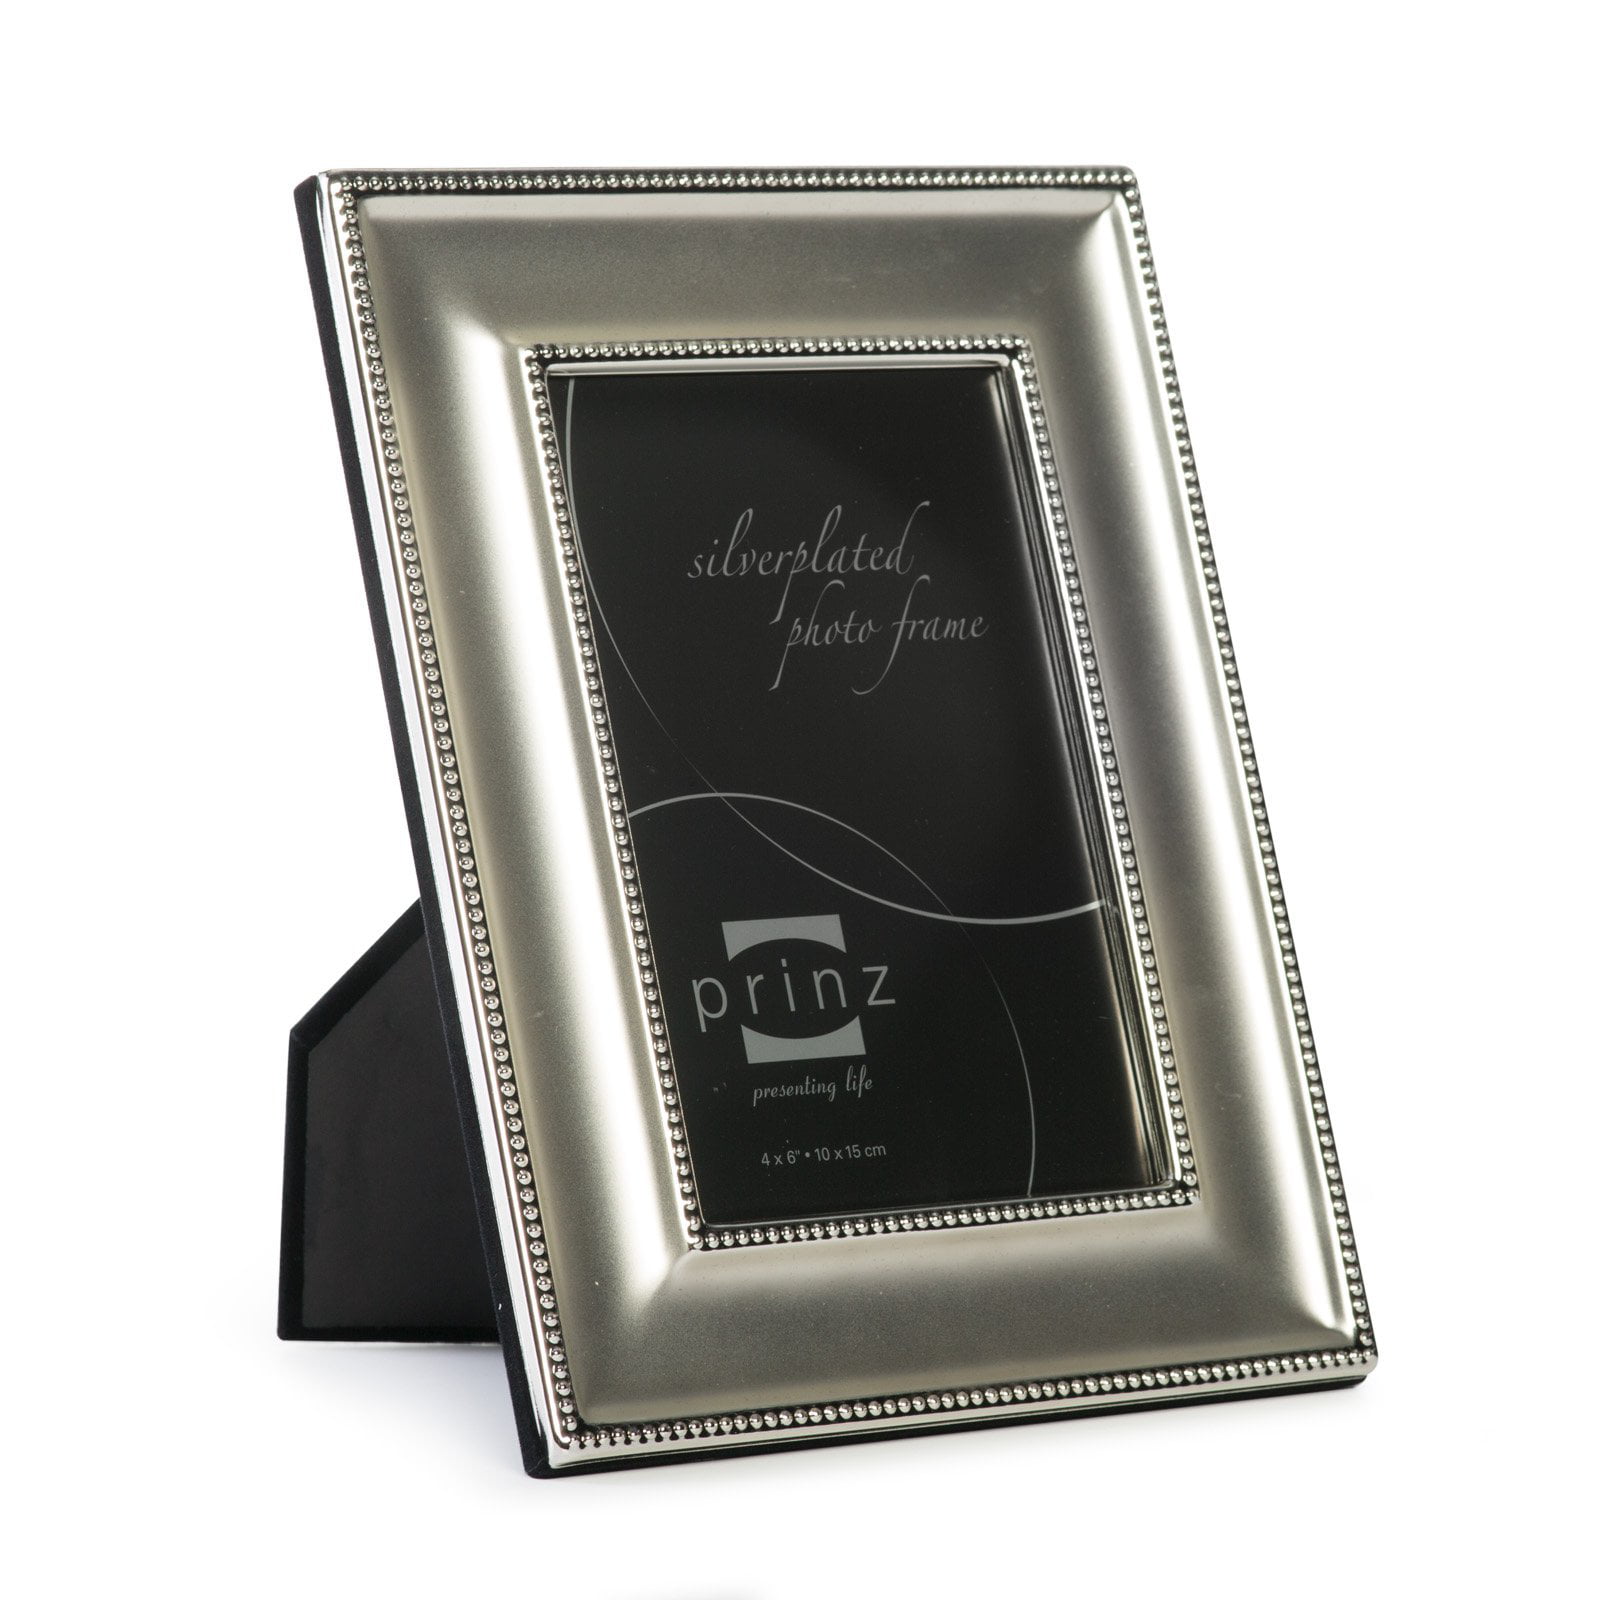 Silver-Plated Picture Frame 4 x 6 in